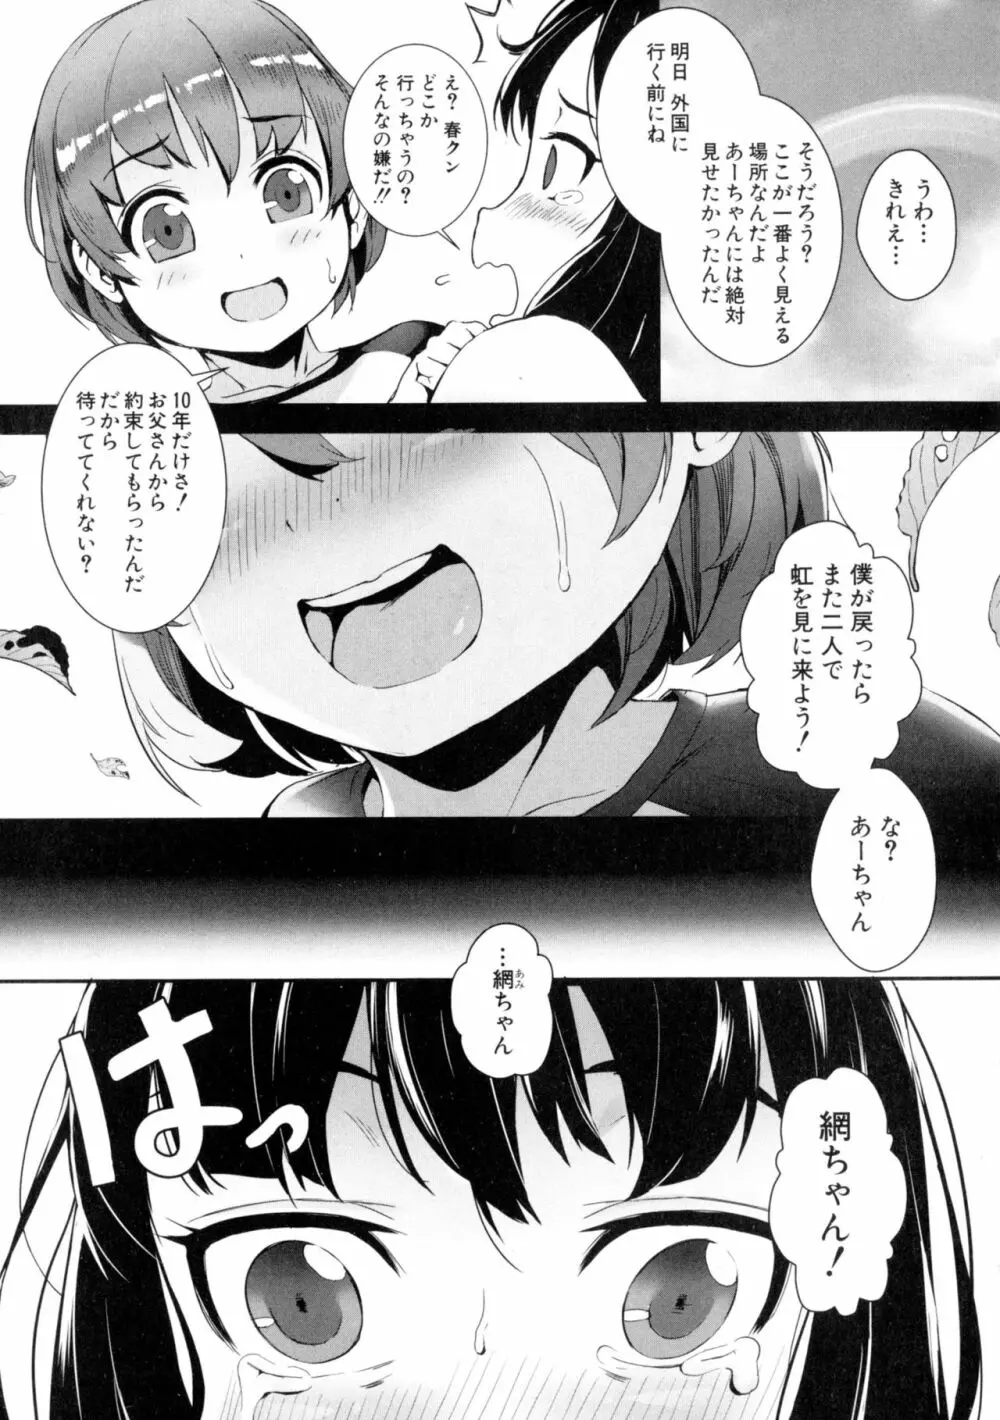 T.F.S 第1-4話 + 御負け PV Page.3